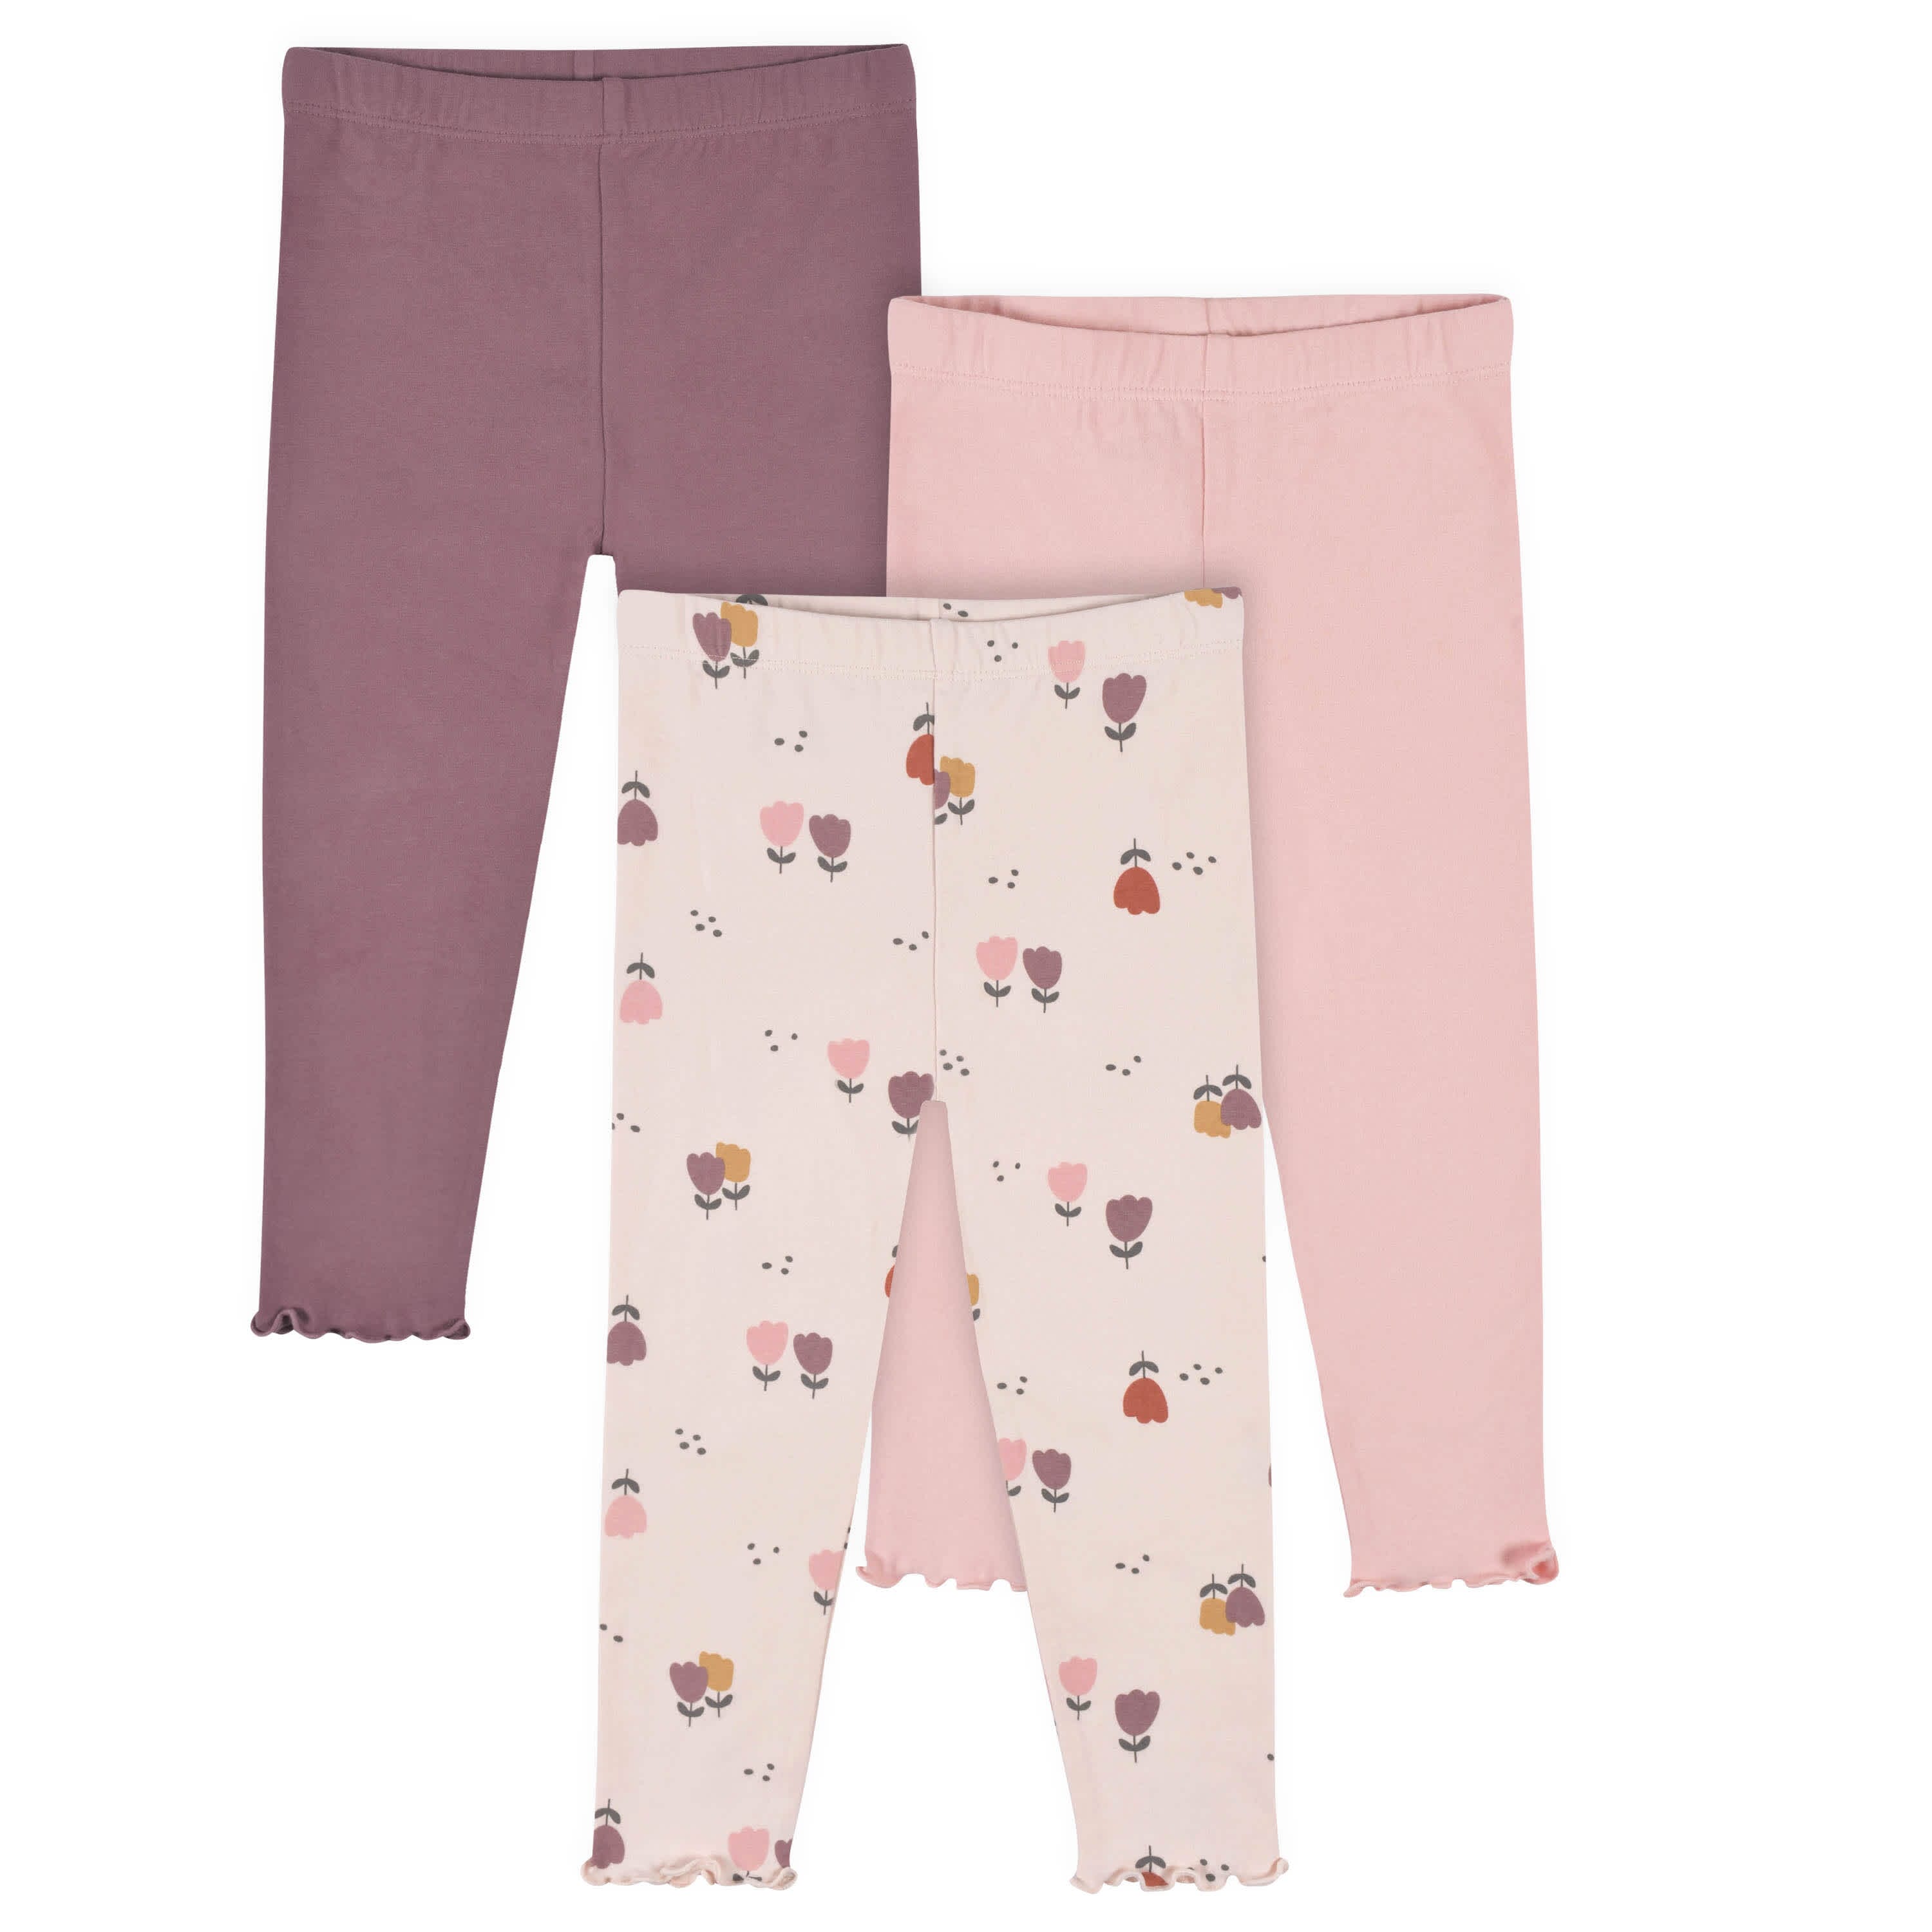 Floral Child and Baby Leggings